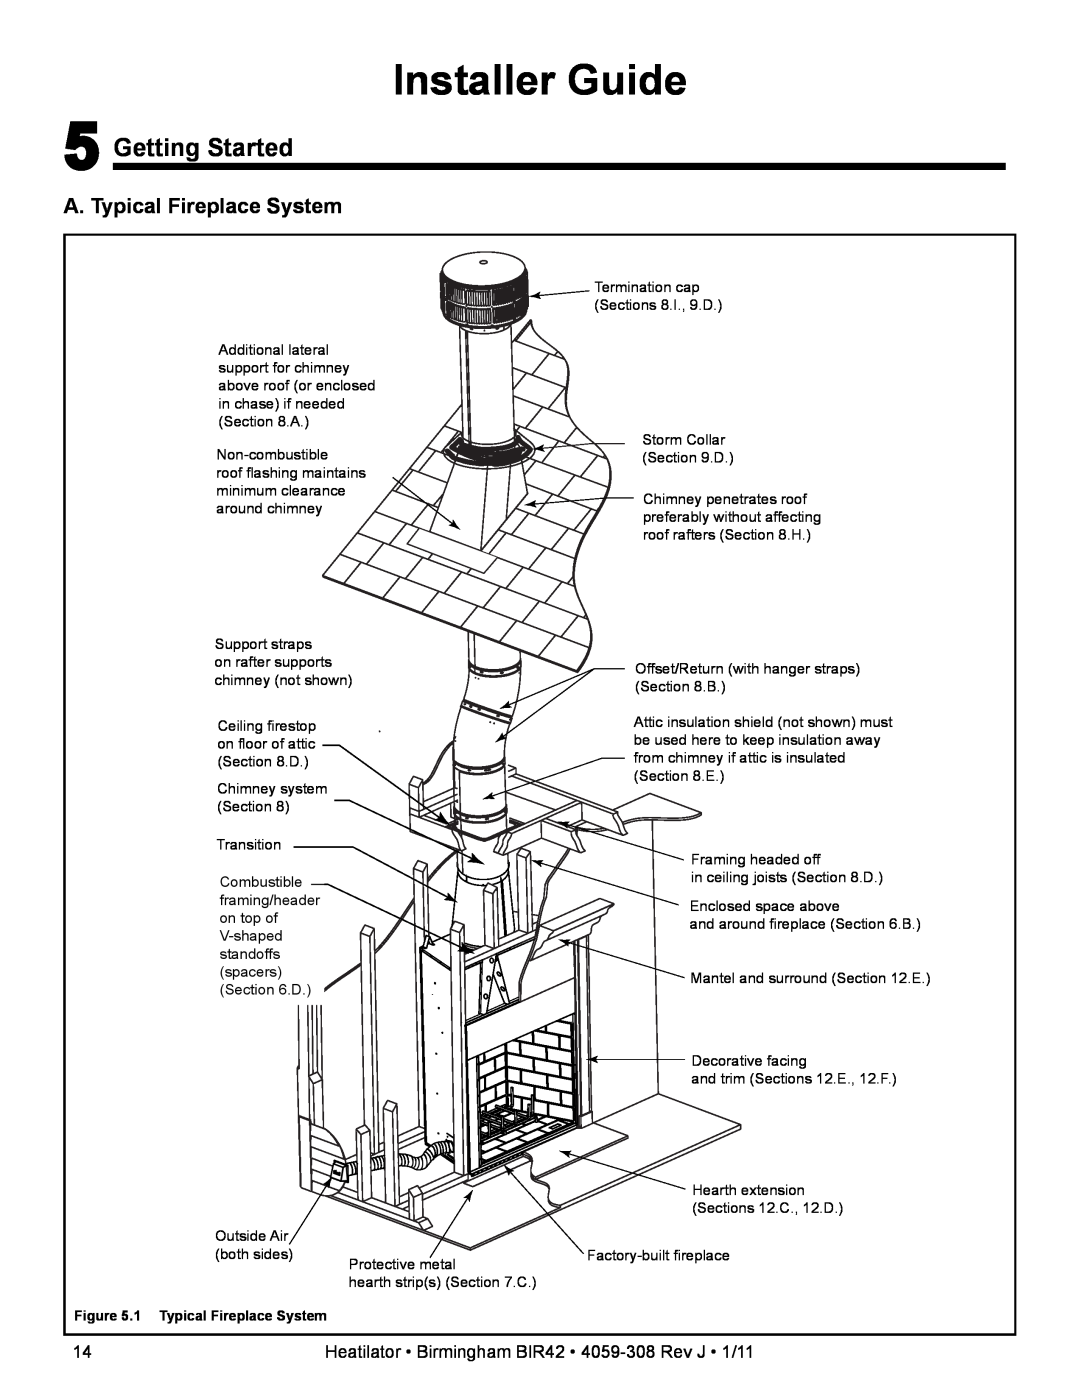 Heatiator BIR42 owner manual Installer Guide, Getting Started, A. Typical Fireplace System 